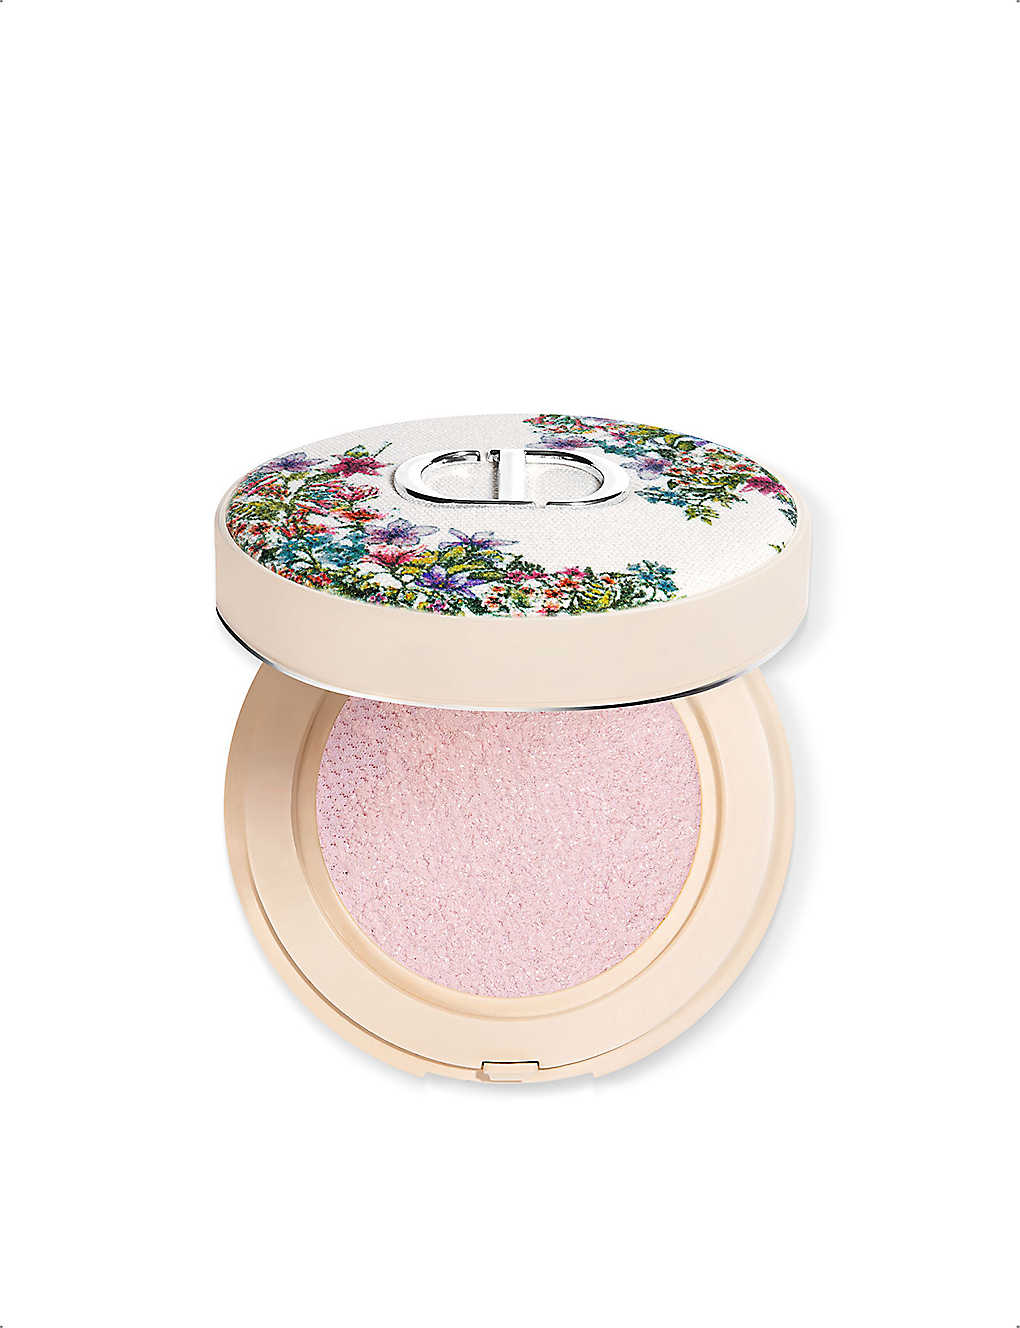 Dior 050 Lavender Forever Blooming Boudoir Limited-edition Cushion Powder 10g